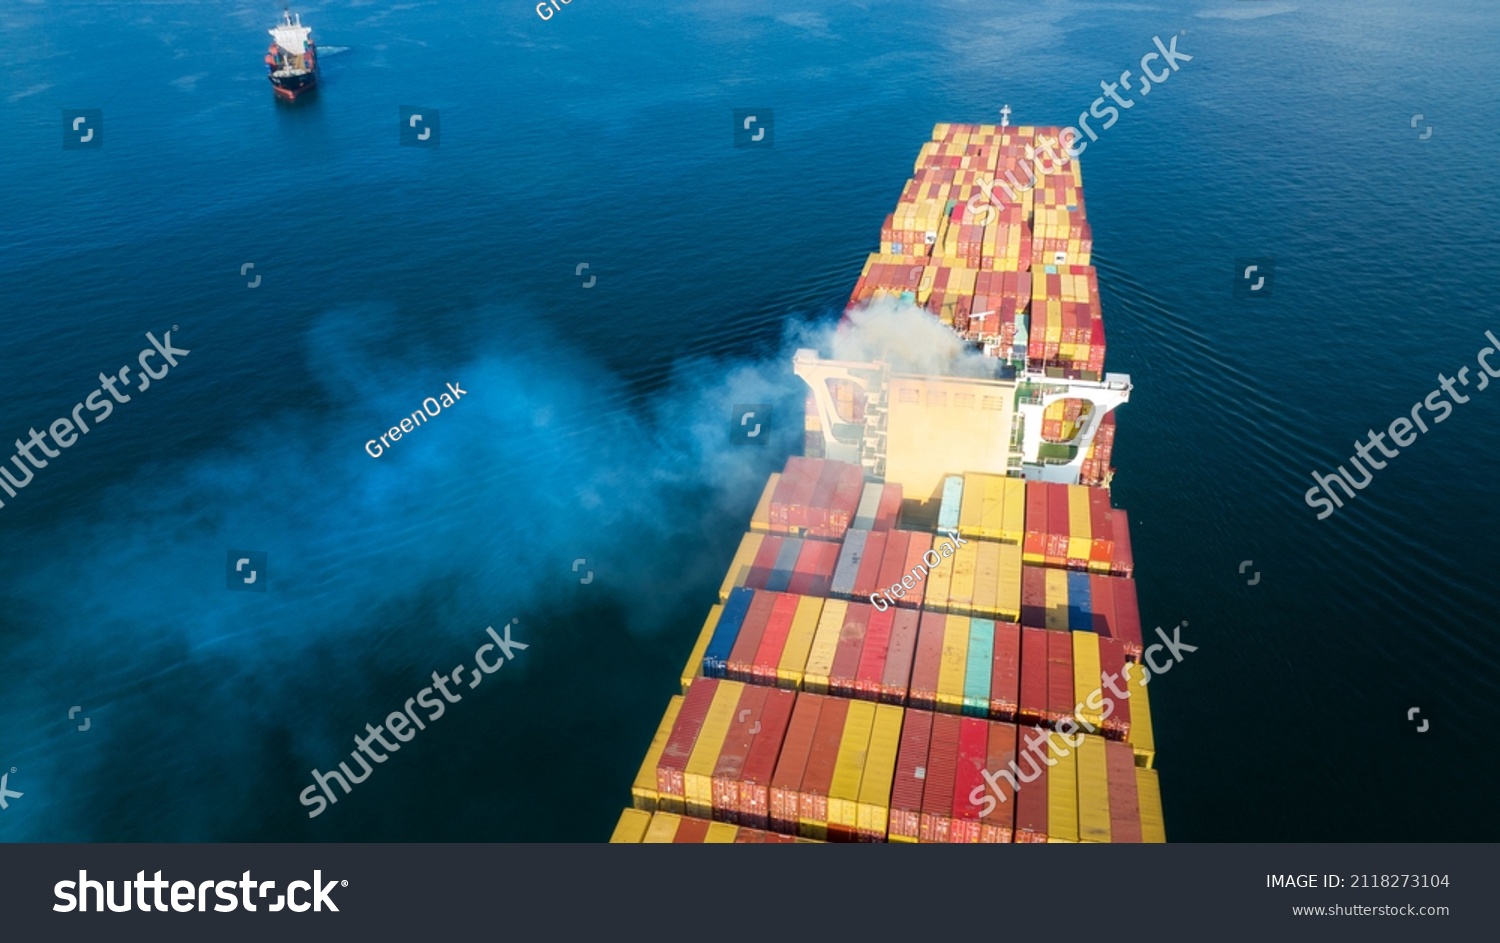 Stern of large cargo ship with Smoke exhaust gas emissions from cargo lagre ship ,Marine diesel engine exhaust gas from combustion. #2118273104